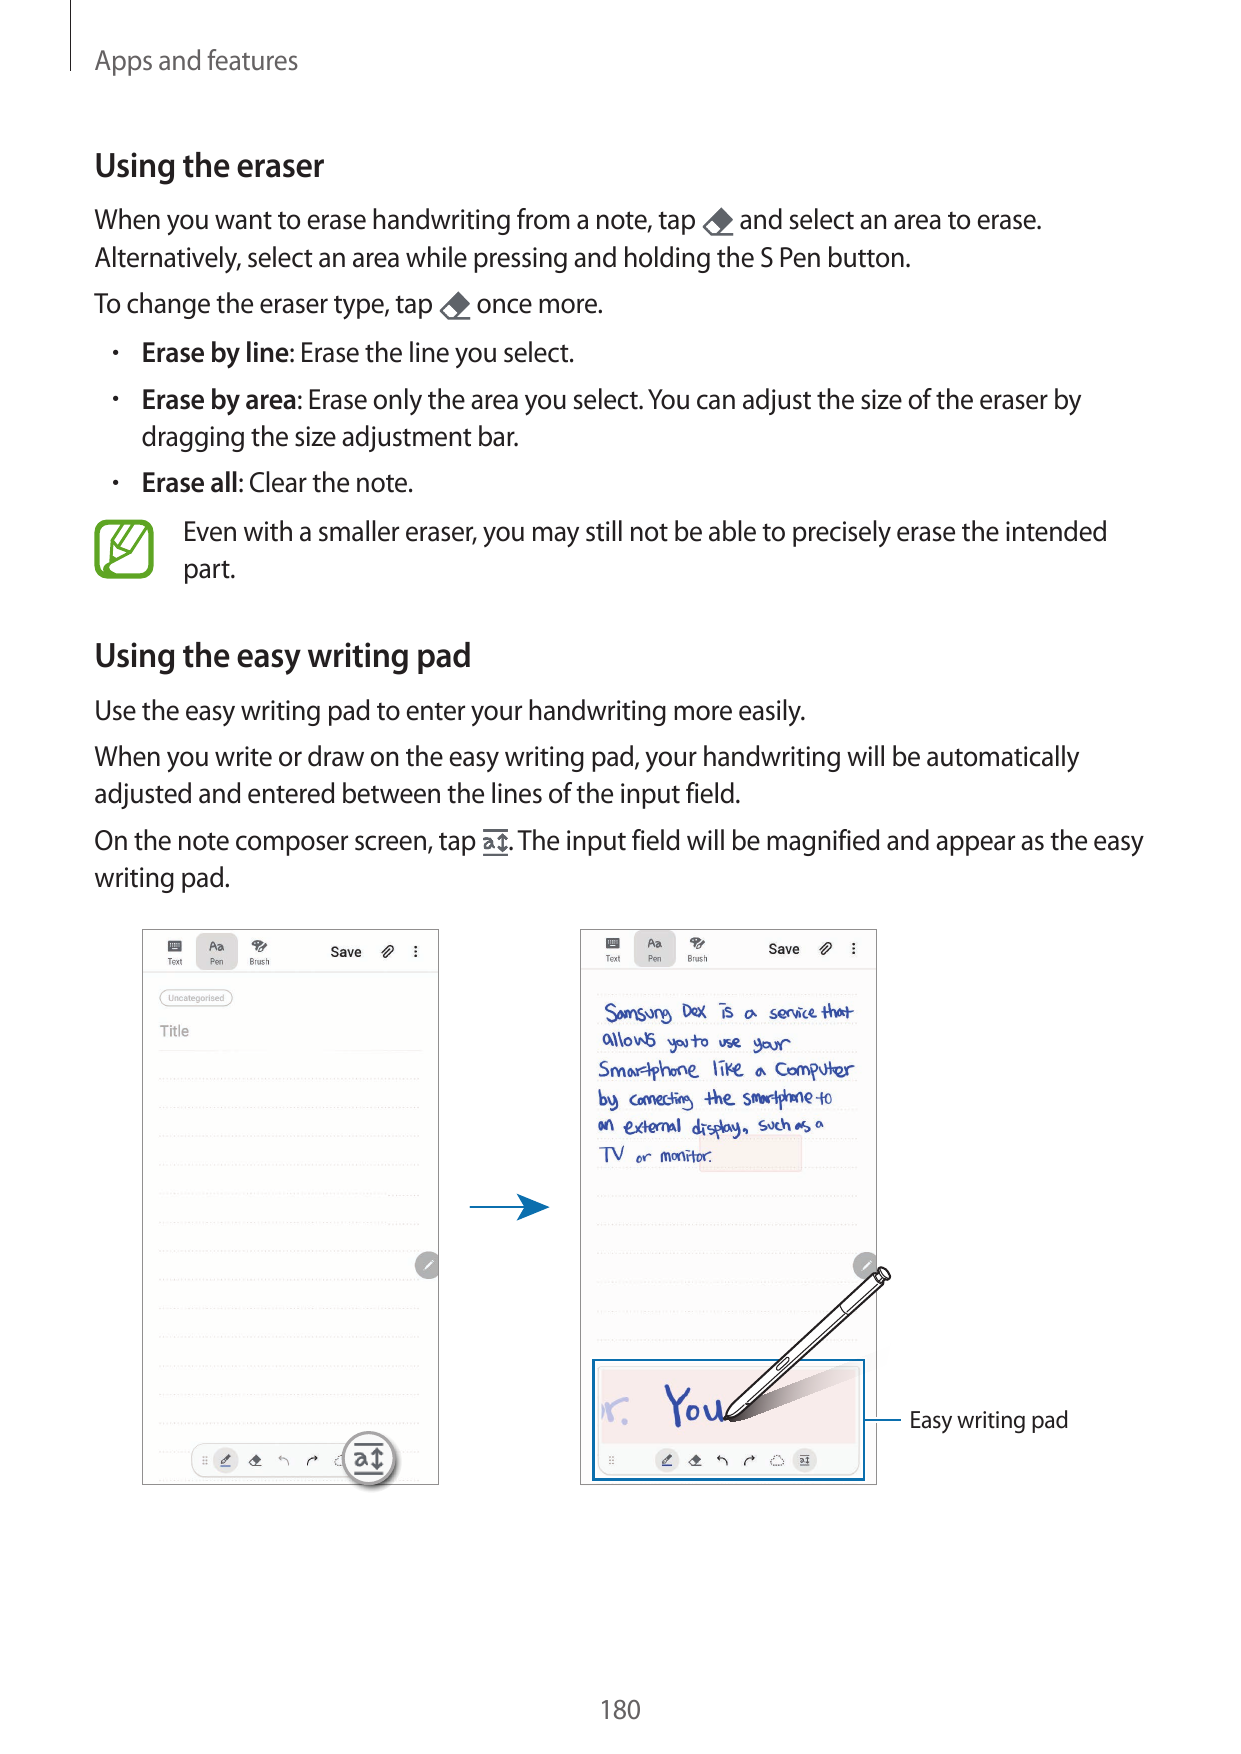 Apps and featuresUsing the eraserWhen you want to erase handwriting from a note, tap and select an area to erase.Alternatively, 